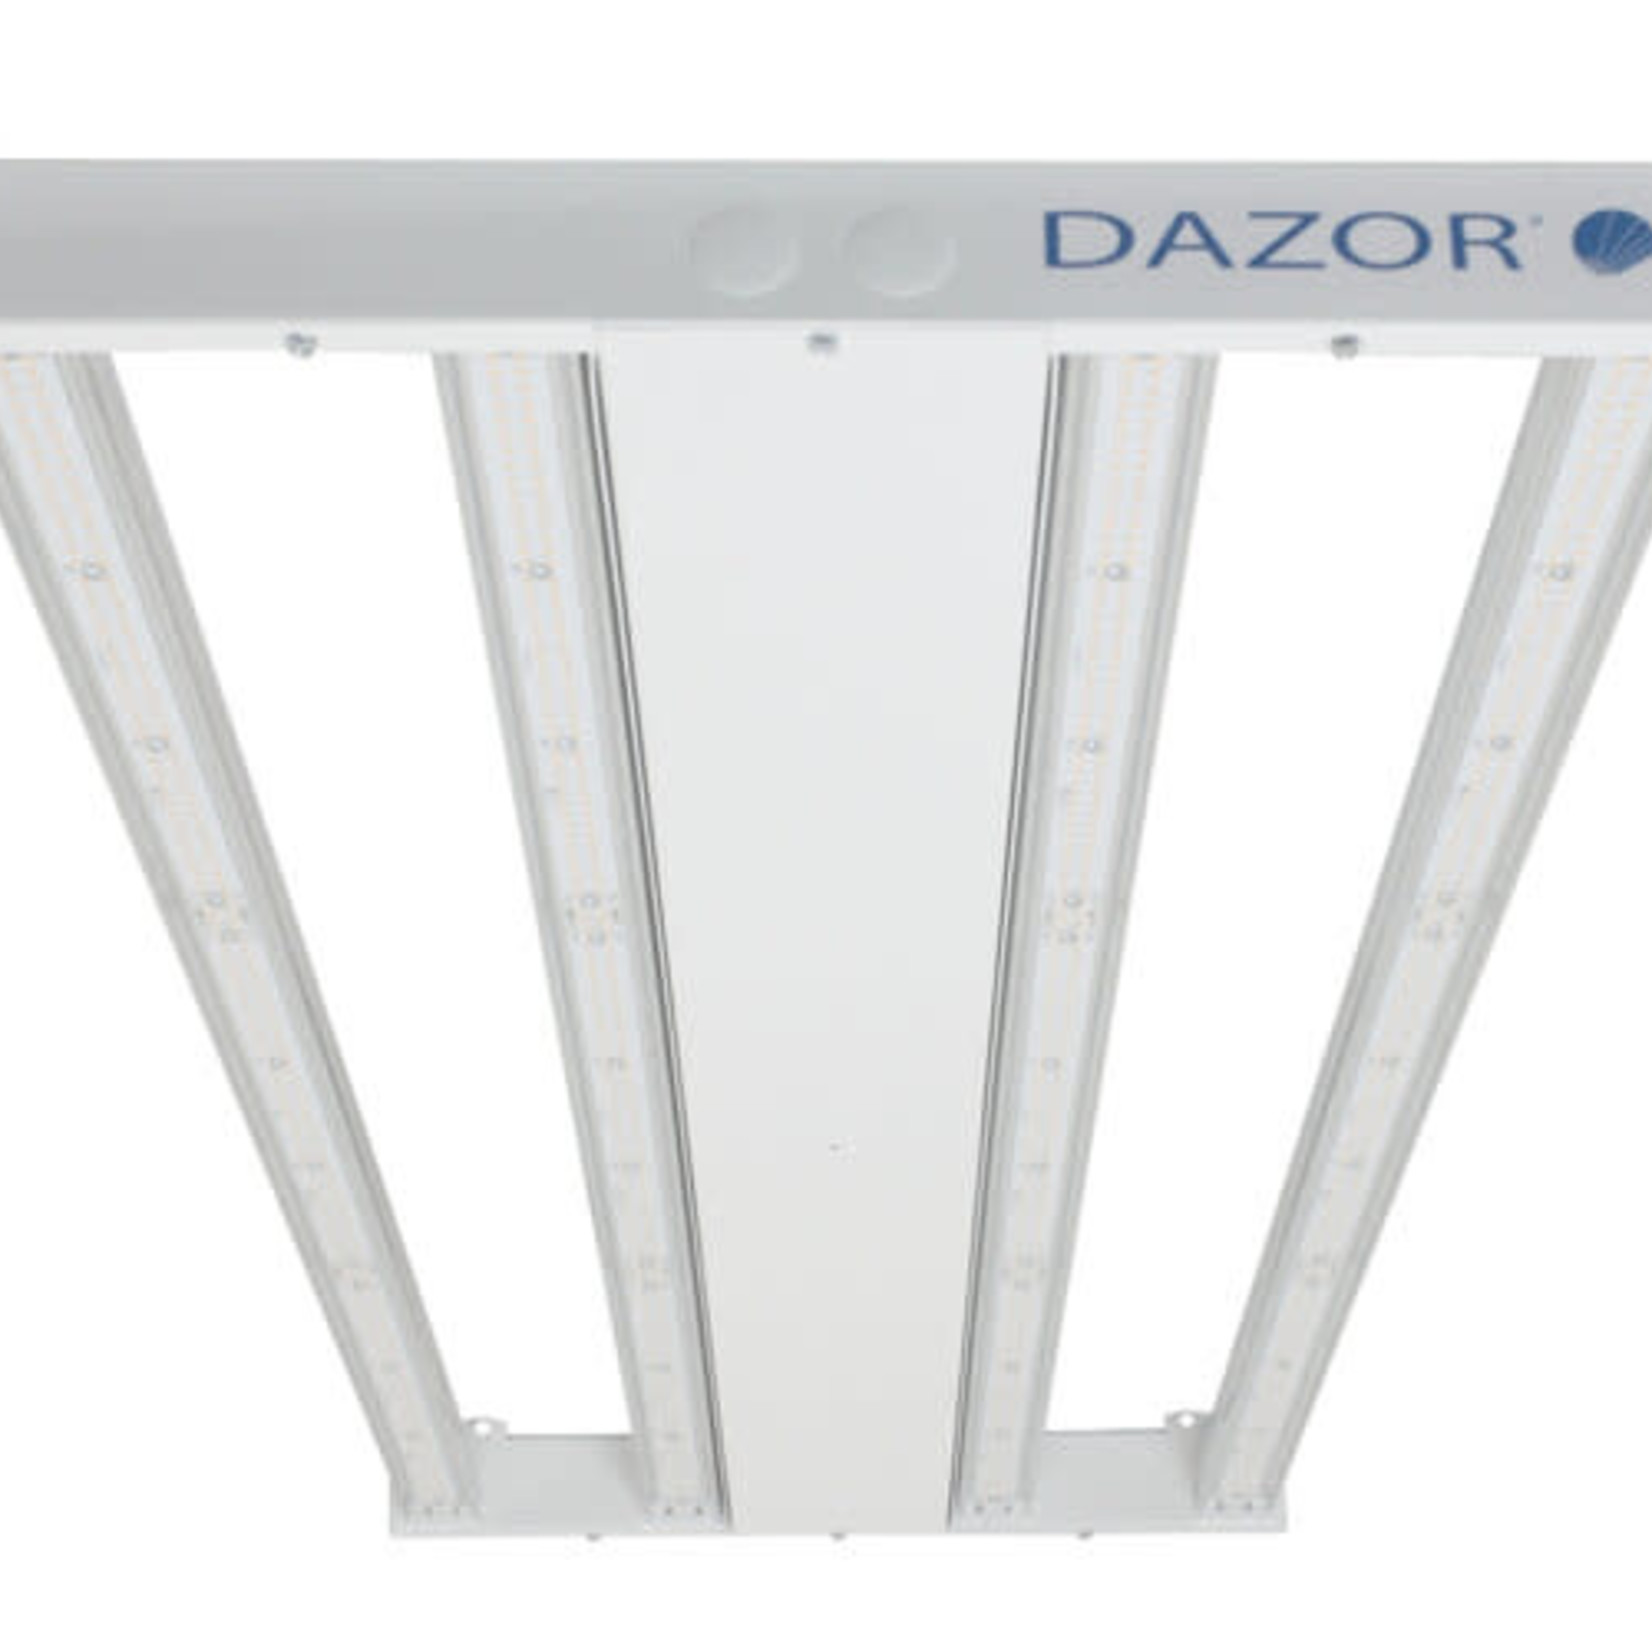 Dazor Dazor PARMax 4 LED Grow Light Dimmable with power cord